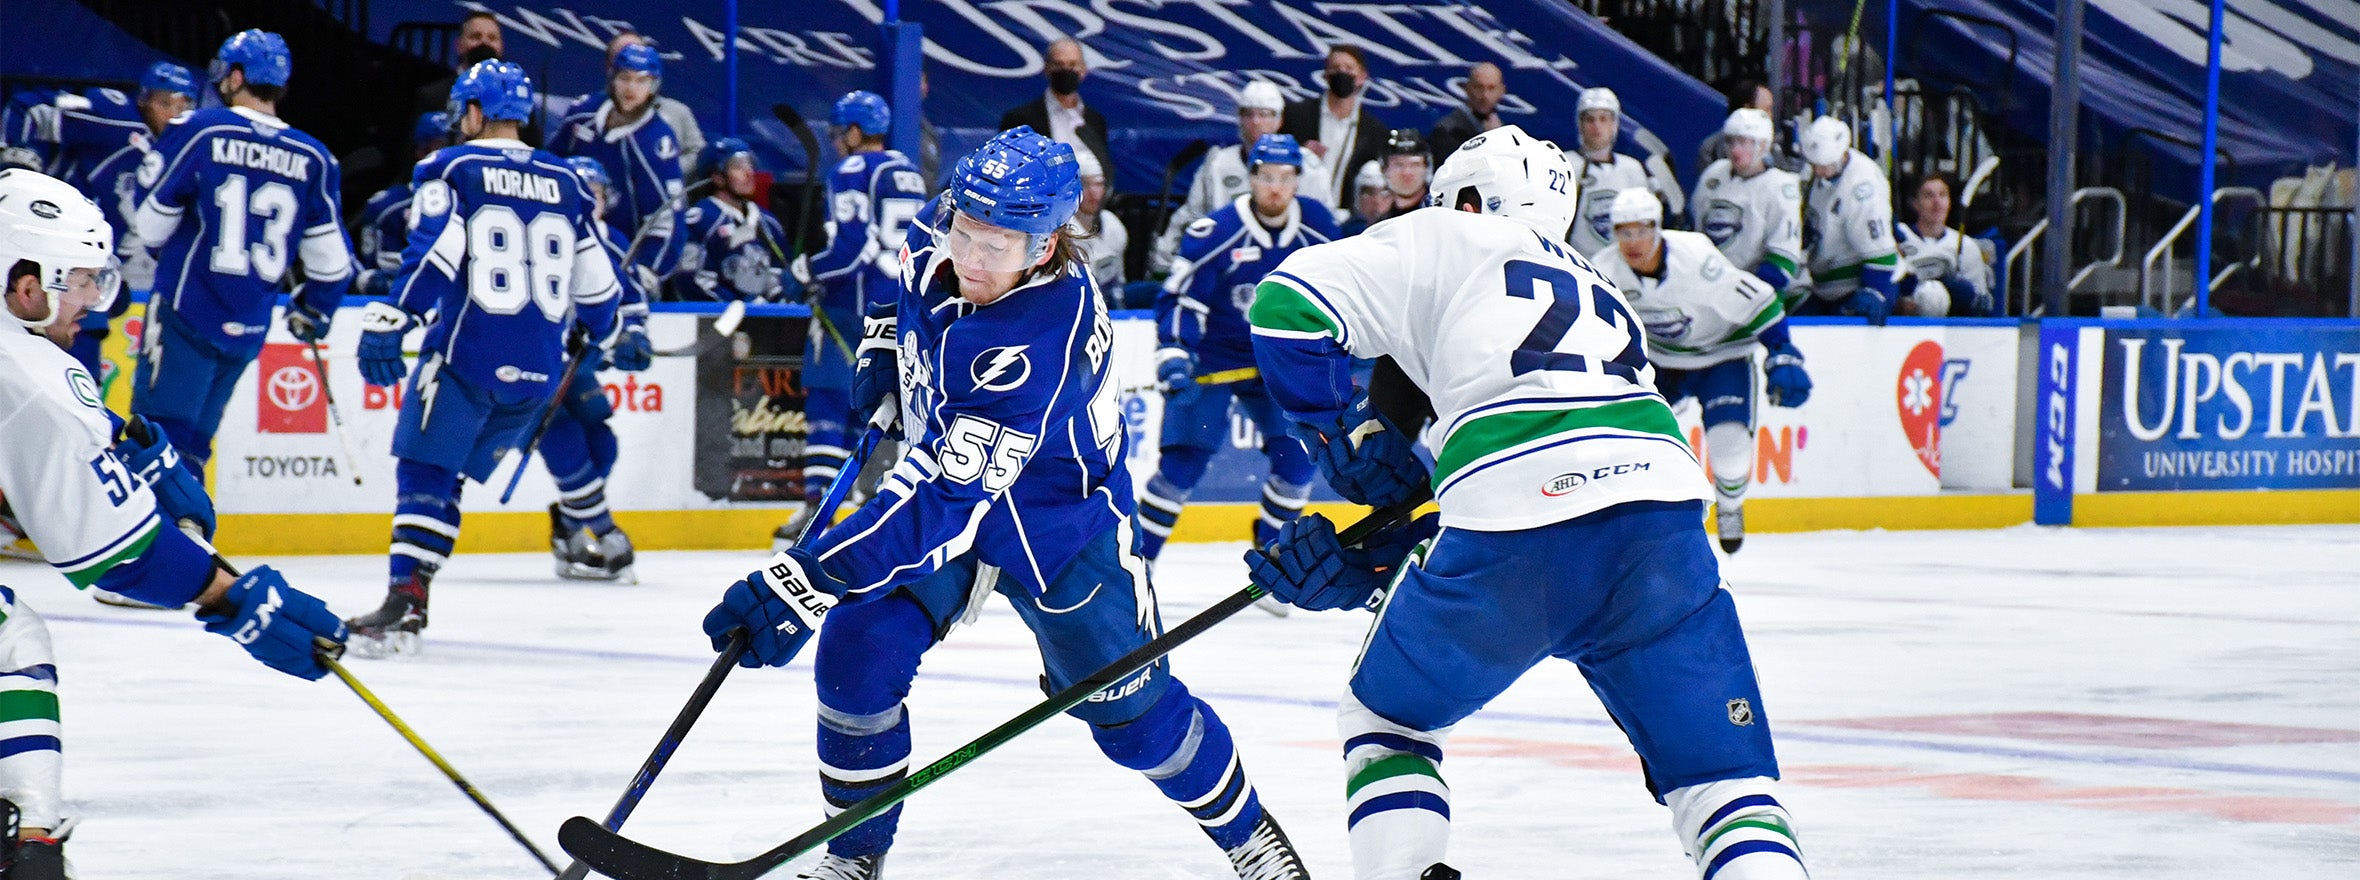 COMETS FALL IN BATTLE WITH ROCHESTER